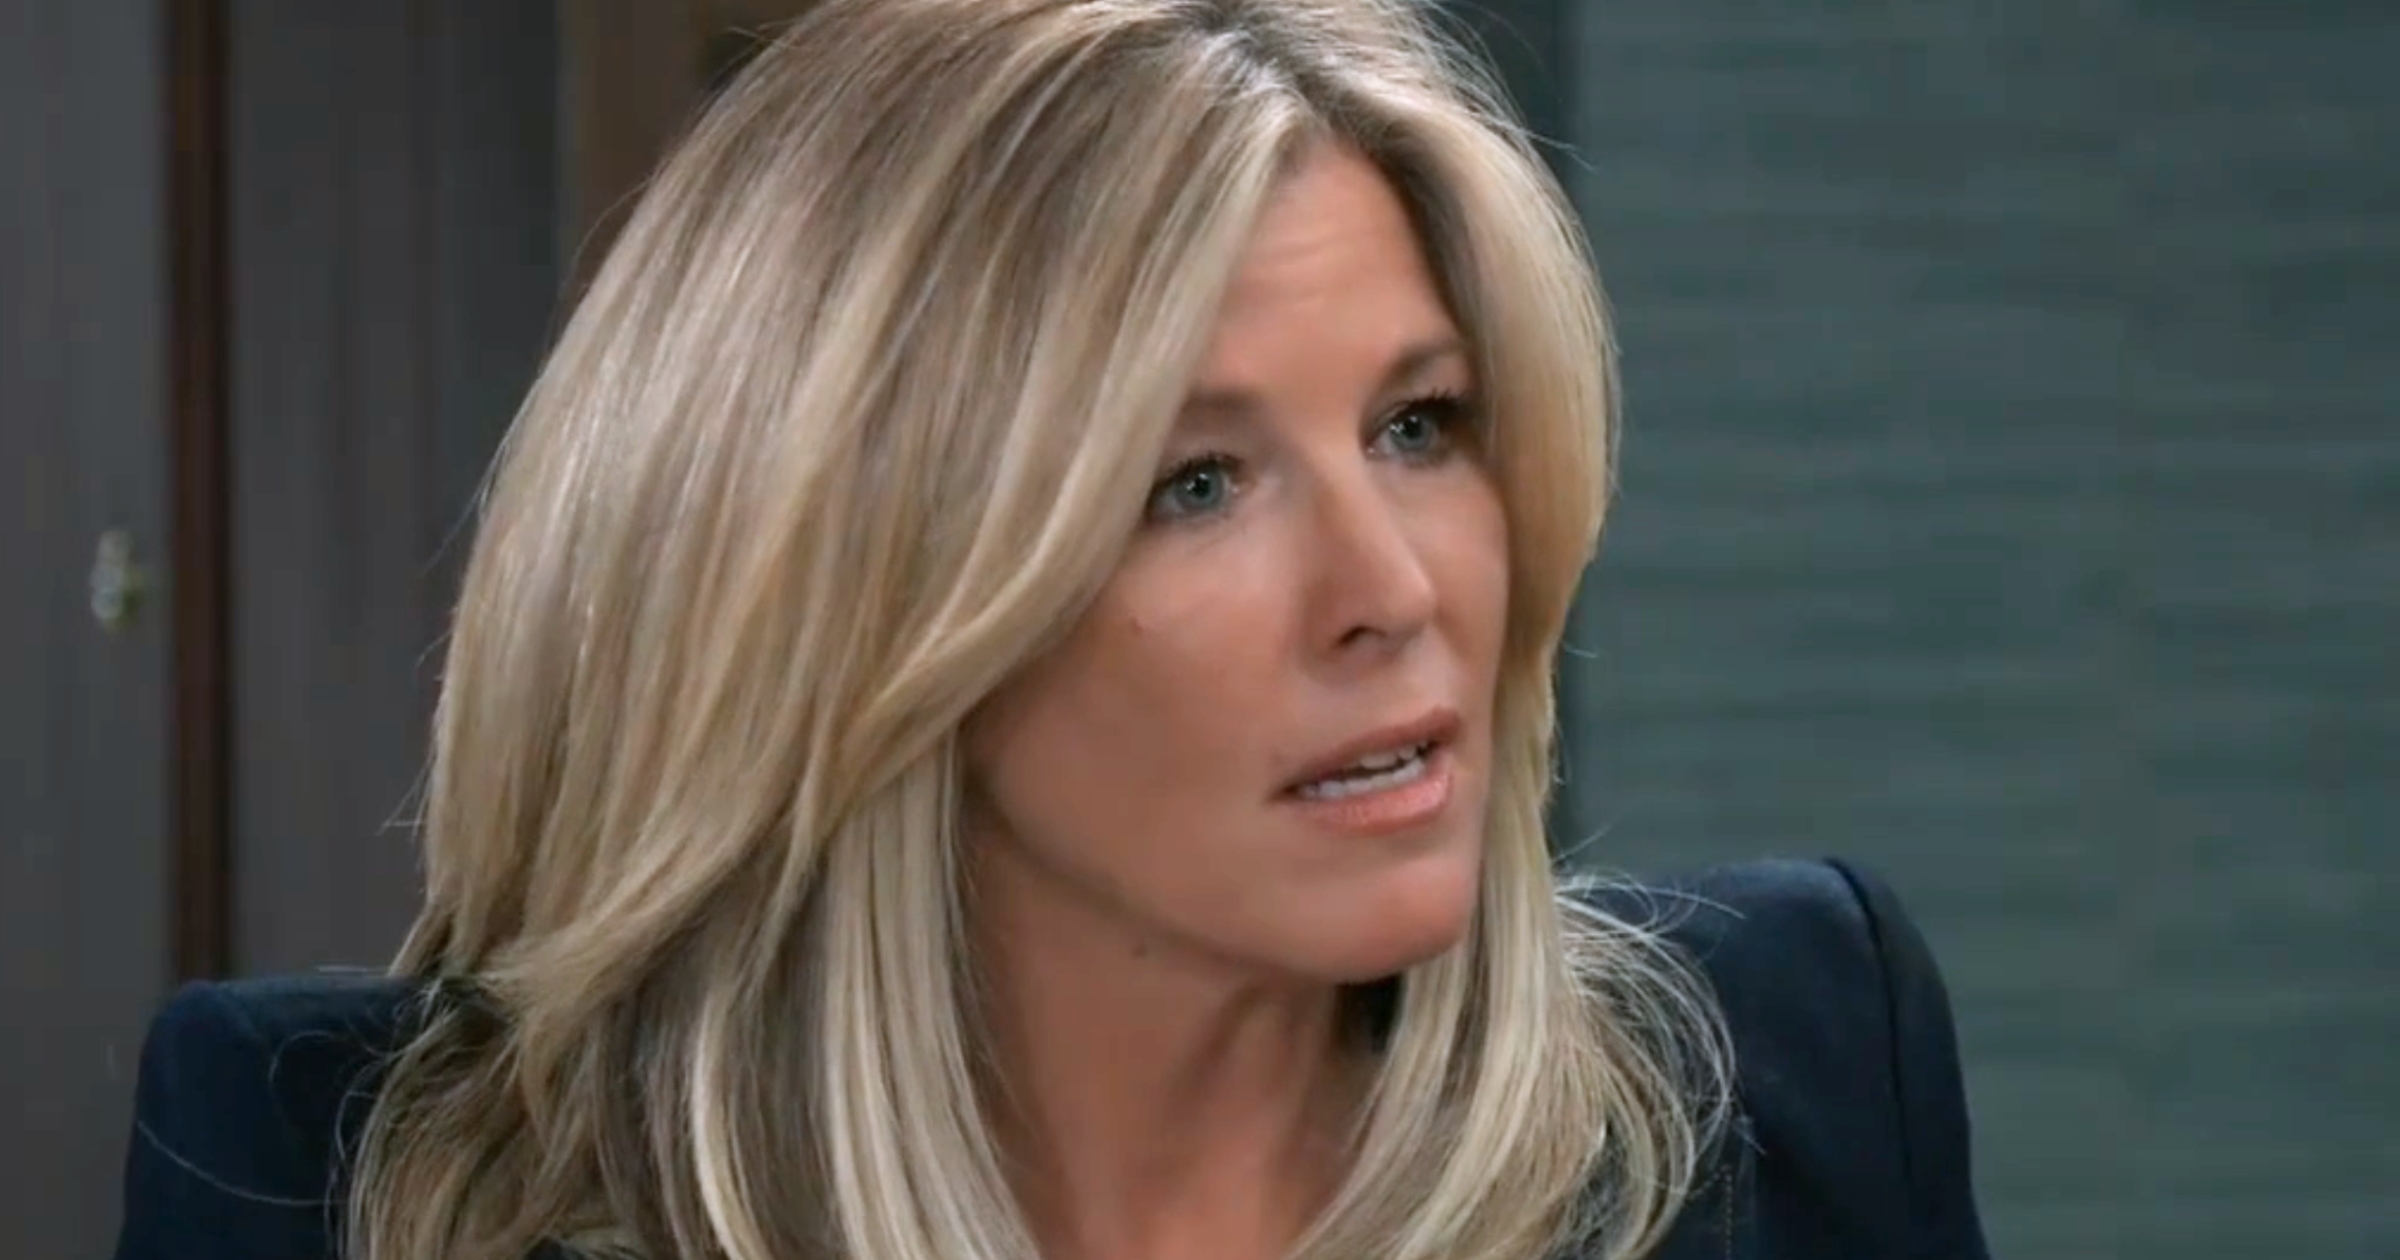 General Hospital - Oct 25 - Carly